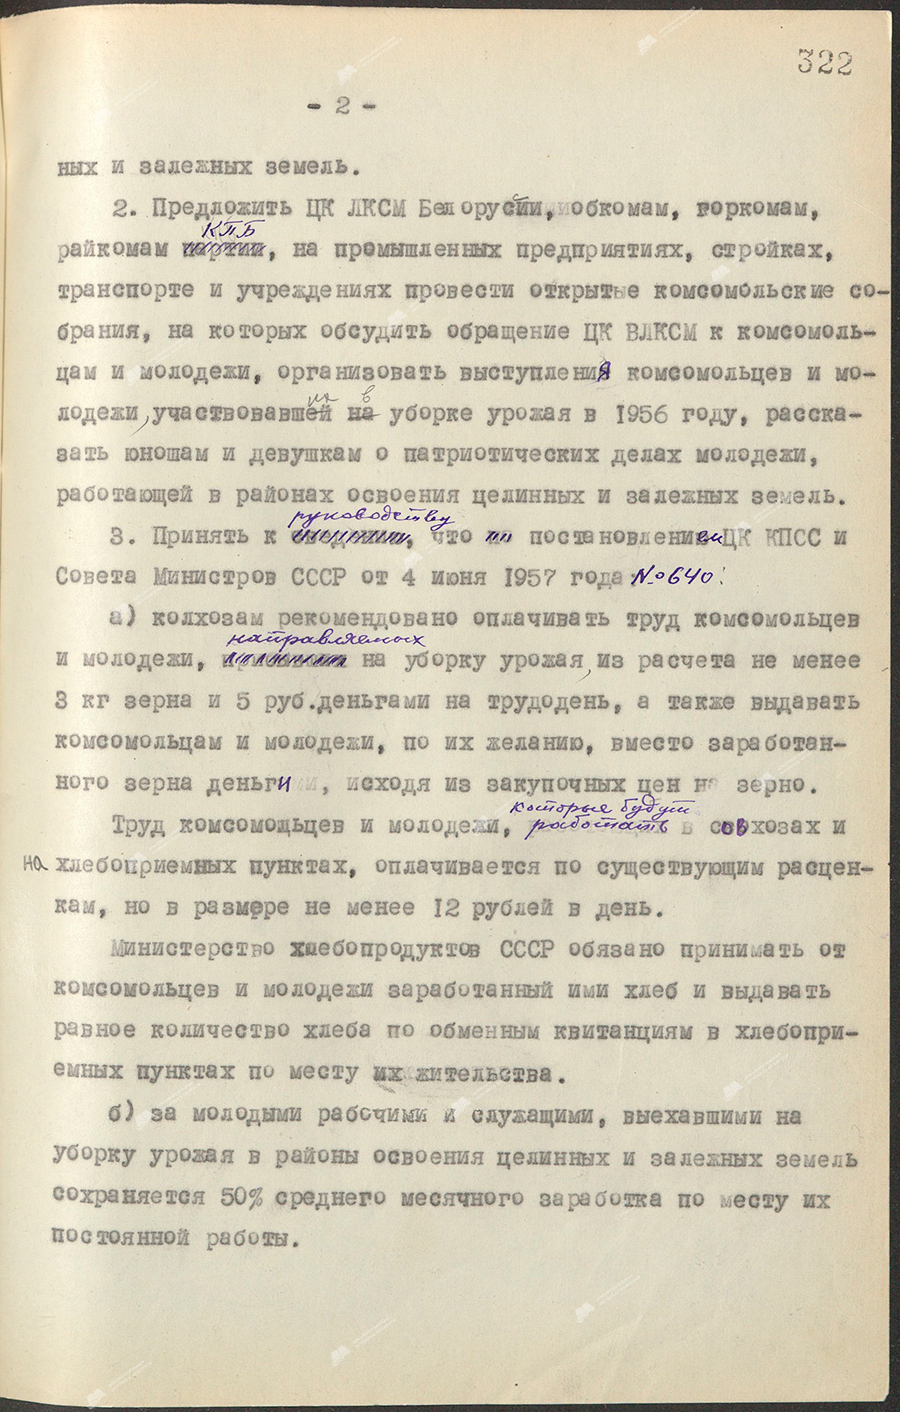 Resolution No. 373 of the Central Committee of the Communist Party of Belarus and the Council of Ministers of the Belarusian SSR «On the participation of Komsomol members and youth of the republic in harvesting in areas of development of virgin and fallow lands in 1957»-с. 1